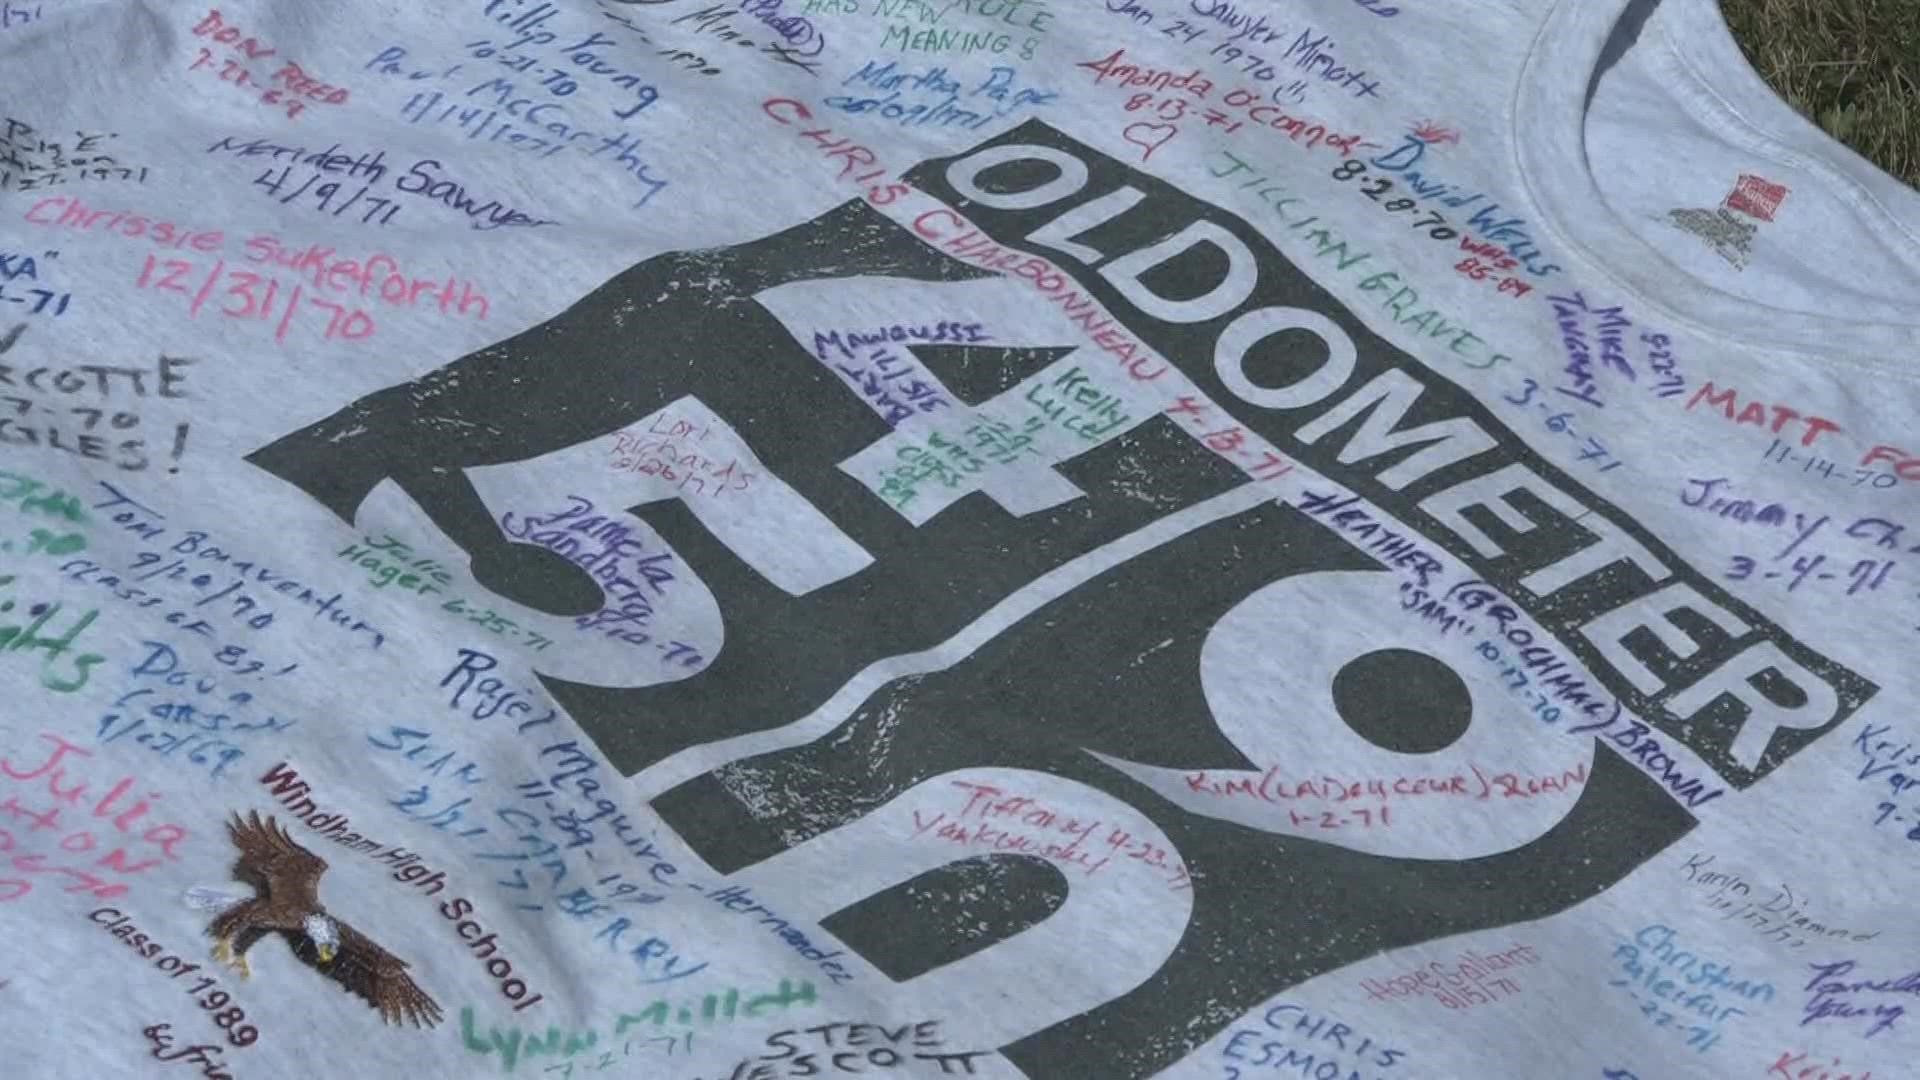 A T-shirt has collected more than 100 signatures. The organizer said it's a way to reconnect with former classmates, especially during a pandemic.